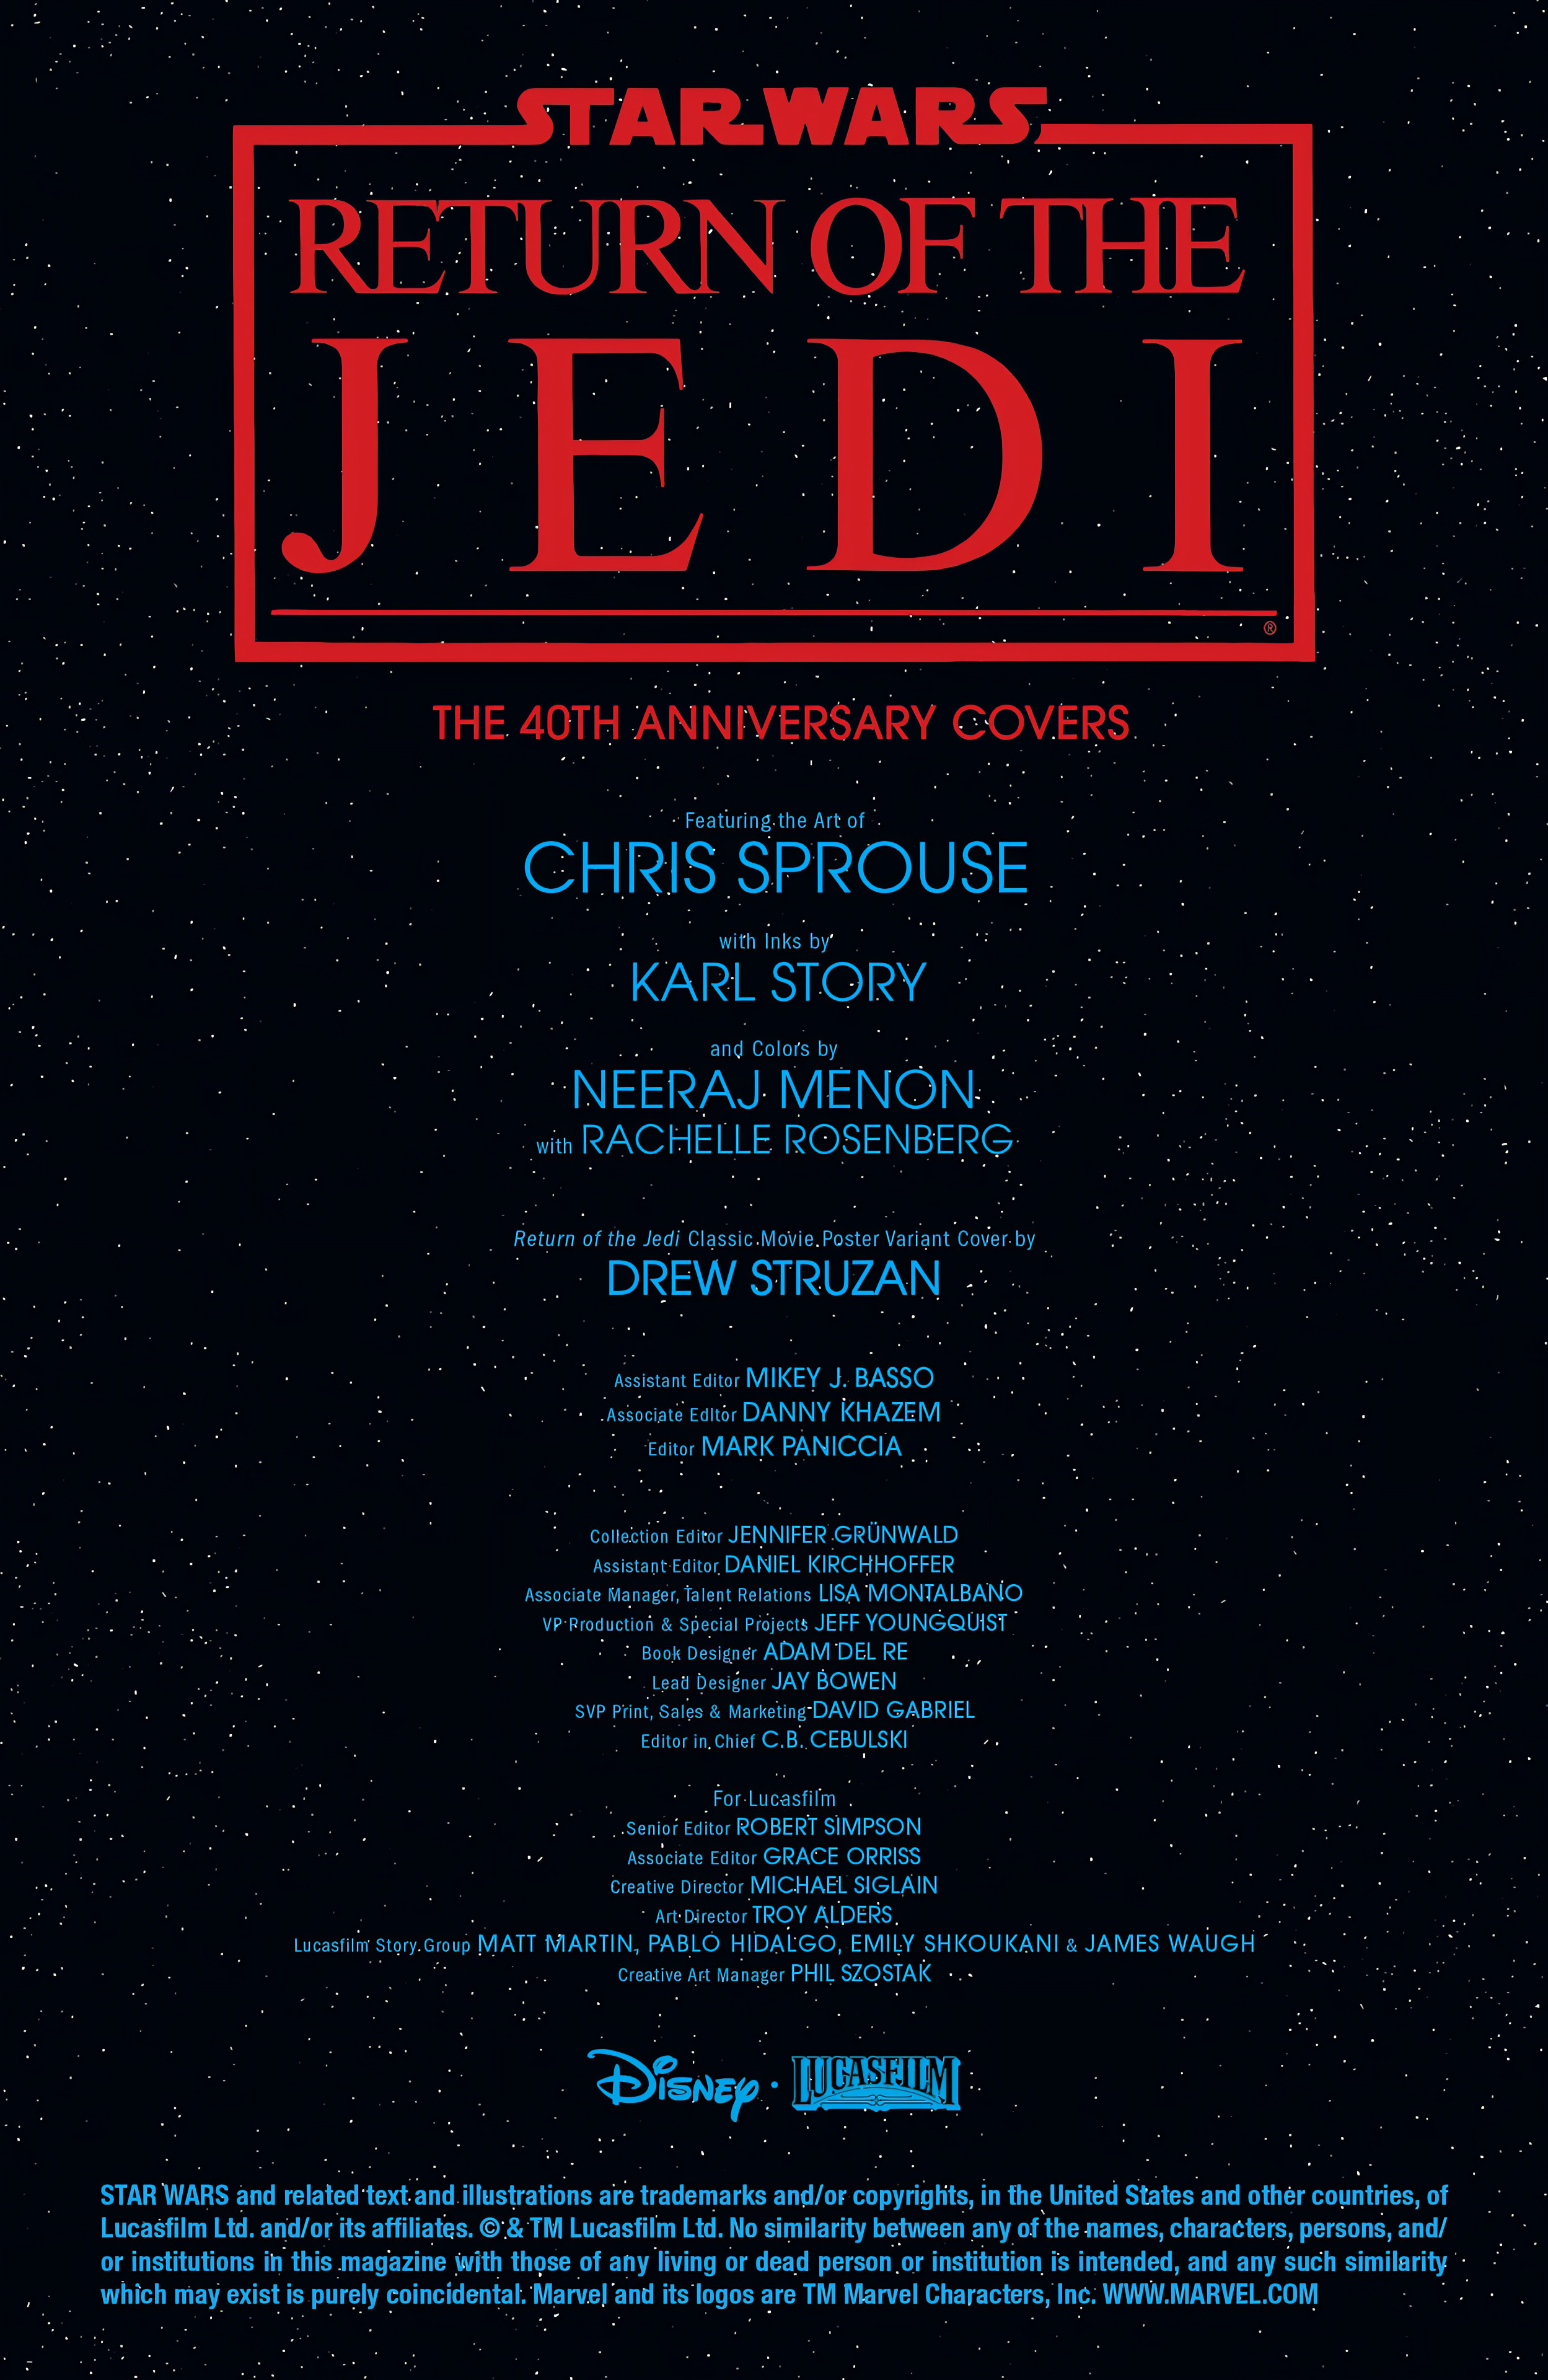 Read online Star Wars: Return of the Jedi - The 40th Anniversary Covers by Chris Sprouse comic -  Issue # Full - 2